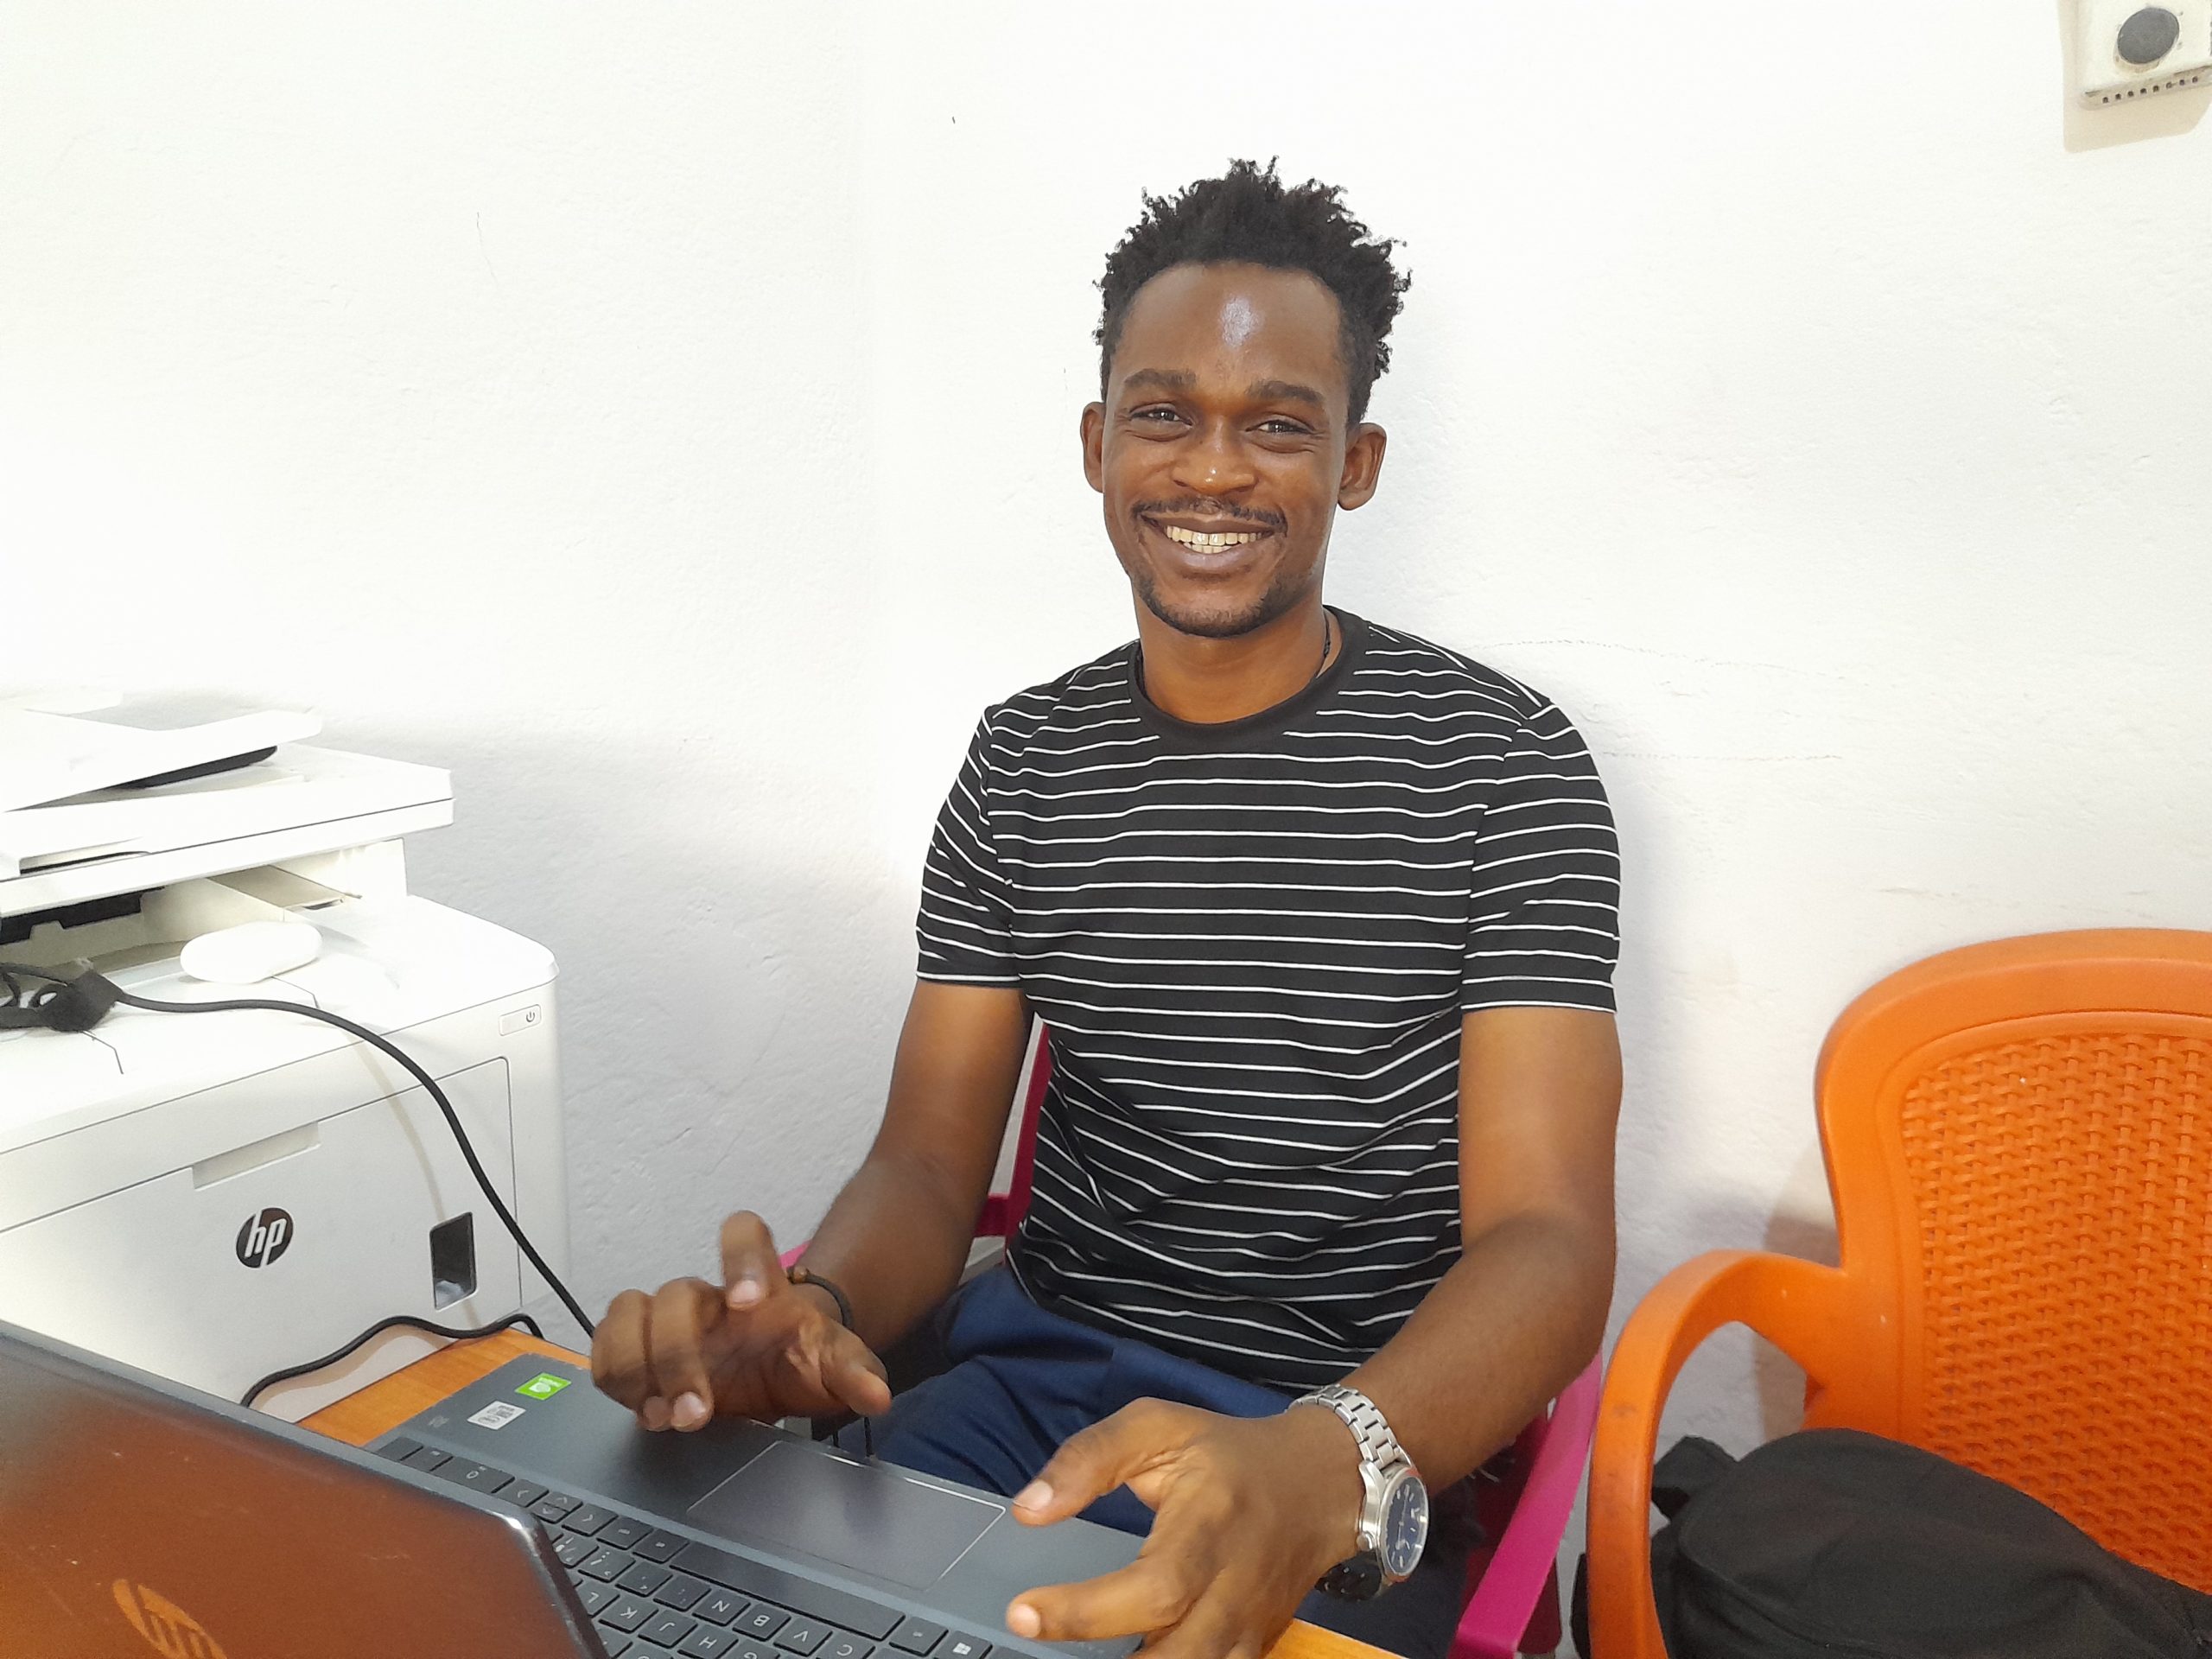 A young Black man in a striped t-shirt sitting at a computer and smiling at the camera